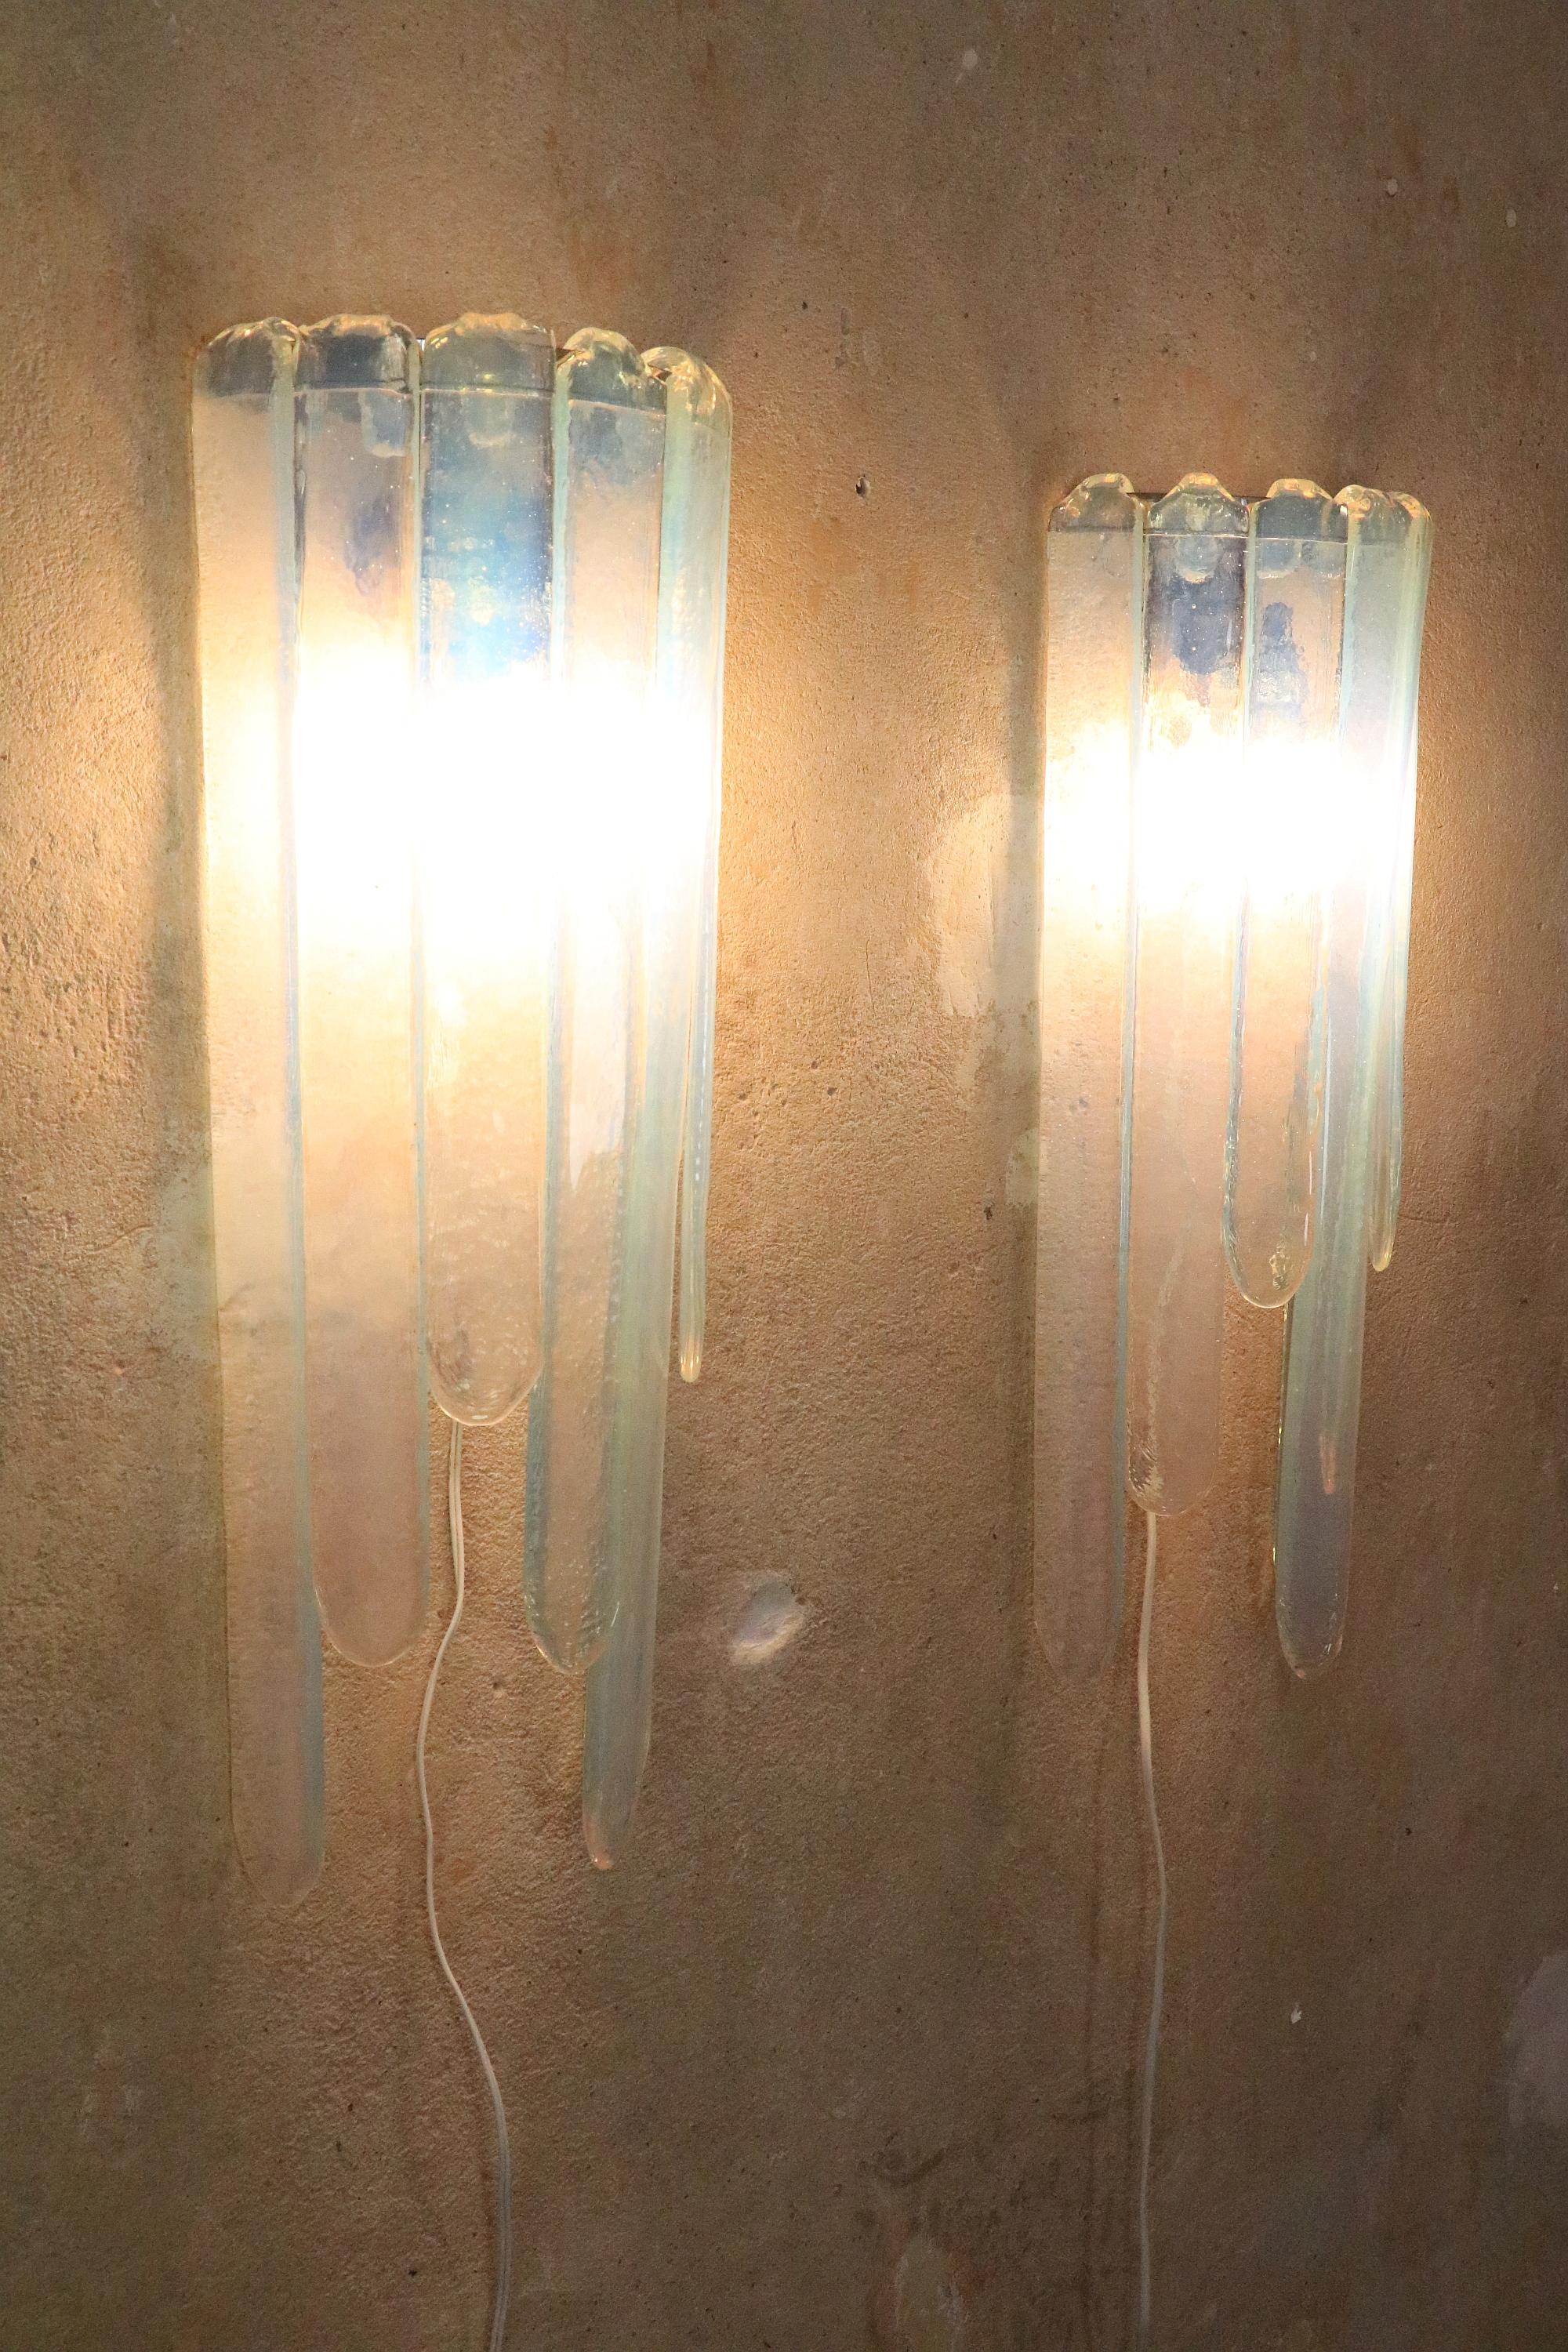 One of two very rare ice blue Murano glass wall lamps.
Design: Carlo Nason for Mazzega
 
Cascading glass rods arranged at different heights, simply hung in a frame. Seven rods per frame.
Exceptional color.
 
Very well preserved. New sockets and